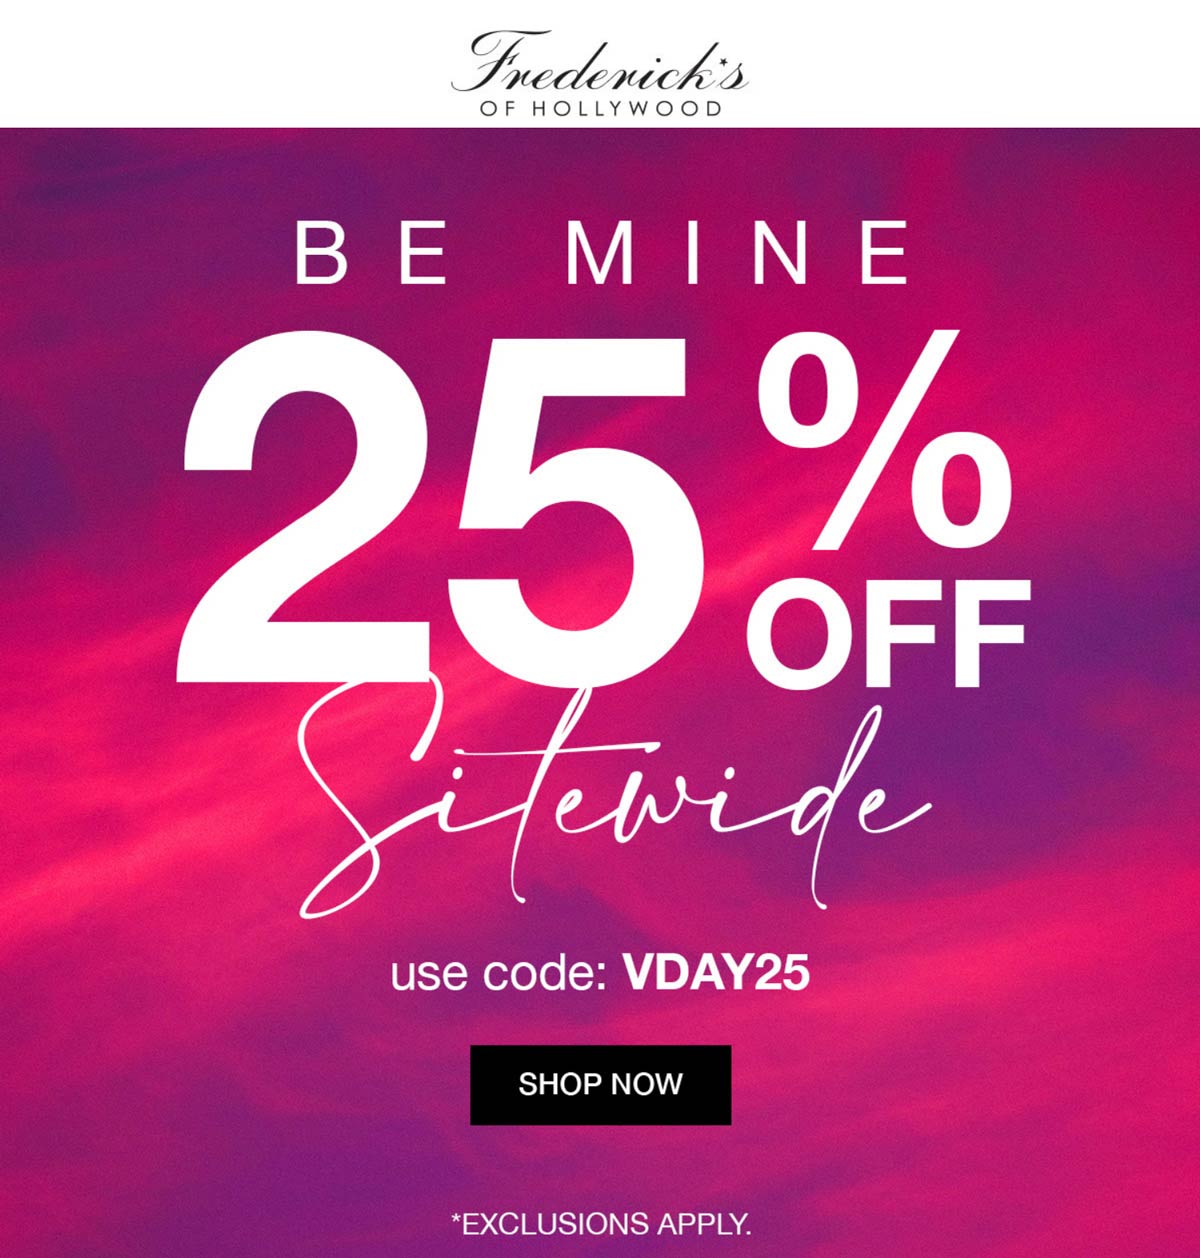 Fredericks of Hollywood stores Coupon  25% off everything online at Fredericks of Hollywood via promo code VDAY25 #fredericksofhollywood 